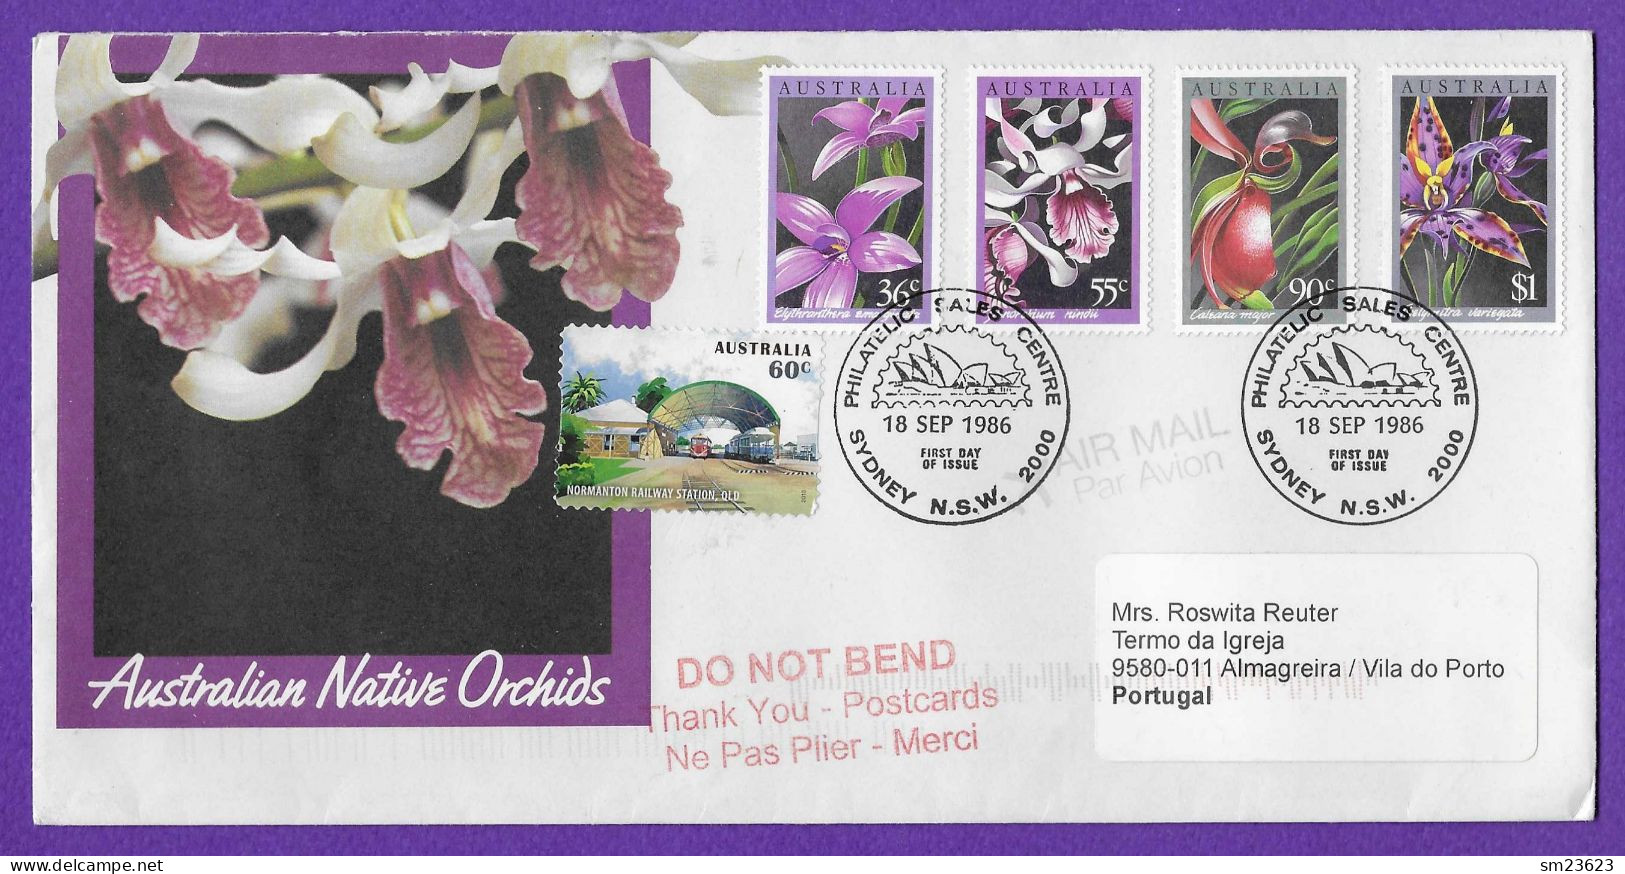 Australien 1986  Mi.Nr. 997 / 1000 , Orchideen - First Day Of Issue 18 SEP 1986 - Primo Giorno D'emissione (FDC)